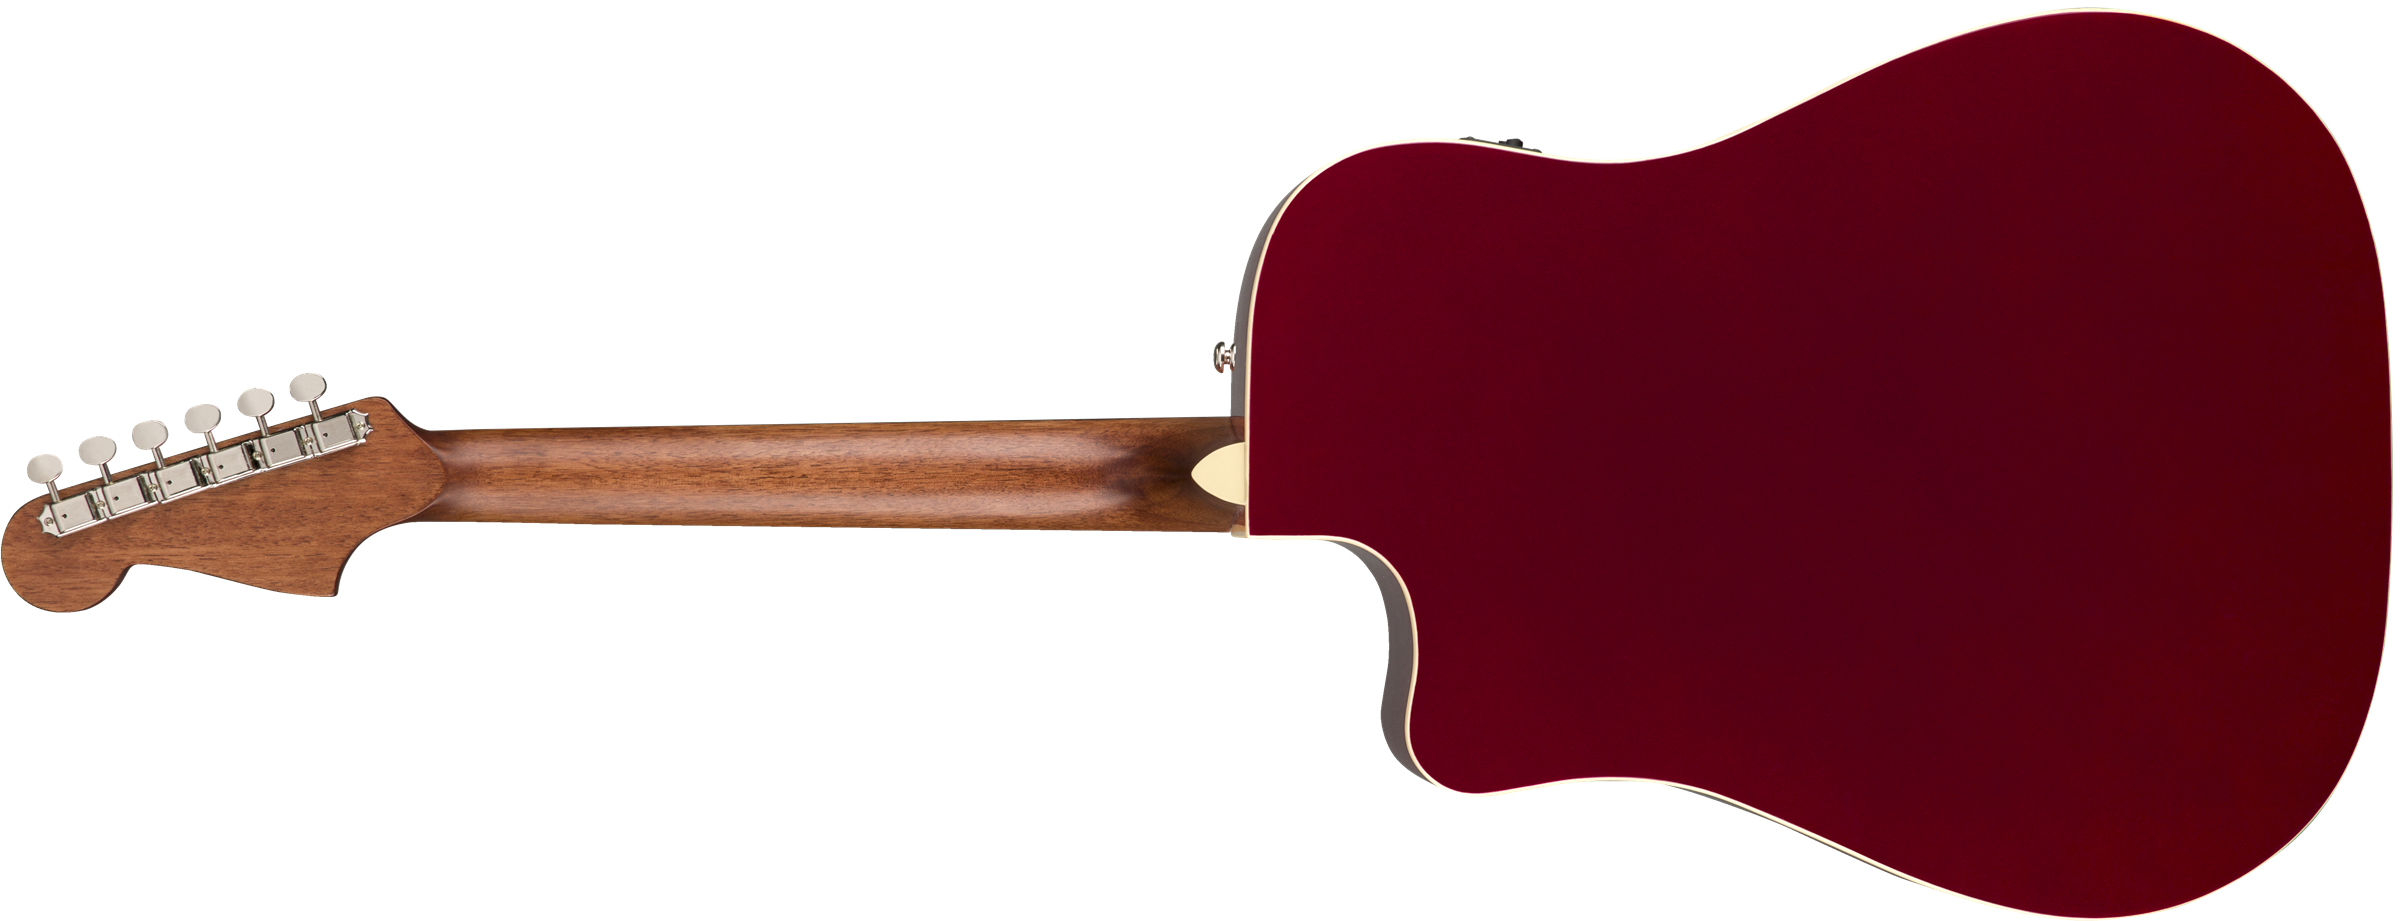 Fender Redondo Player - Candy Apple Red - Acoustic guitar & electro - Variation 6